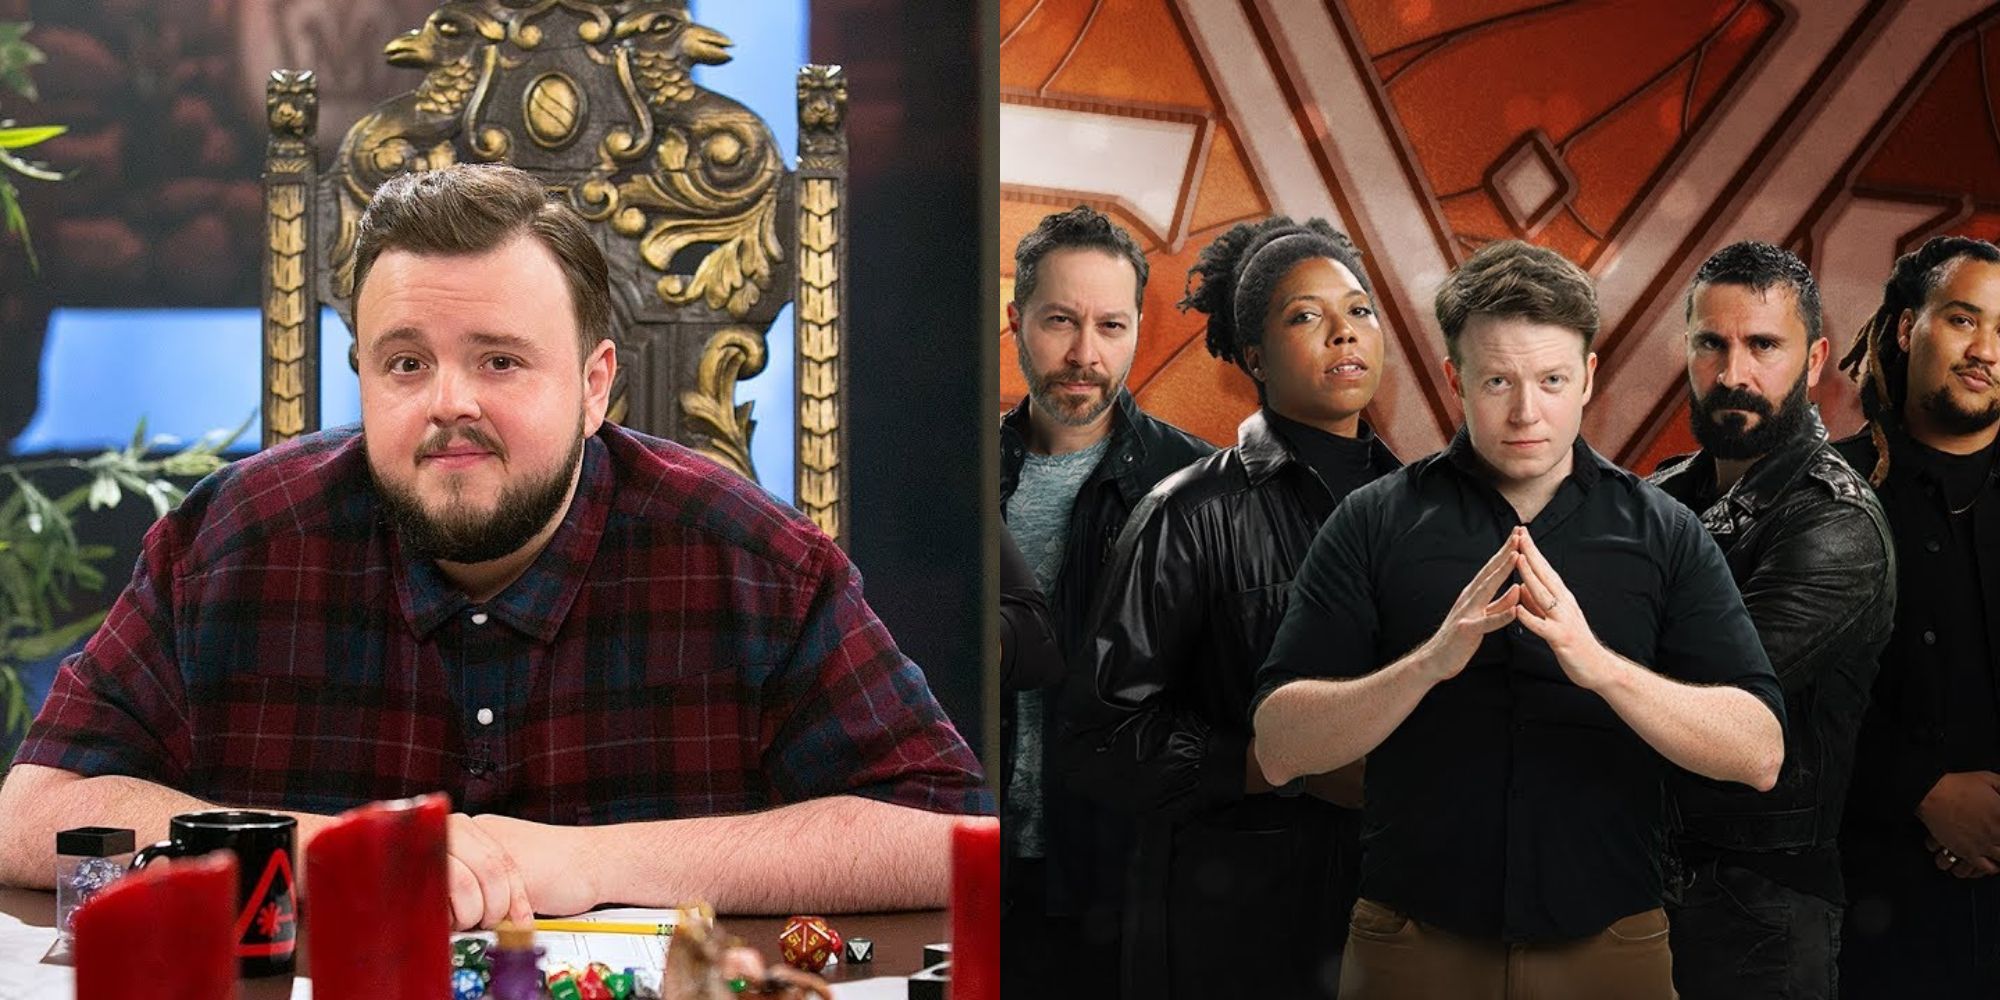 Split image showing YouTube Shows CelebriD&D with Game of Thrones' John Bradley and Exandria Unlimited Calamity.